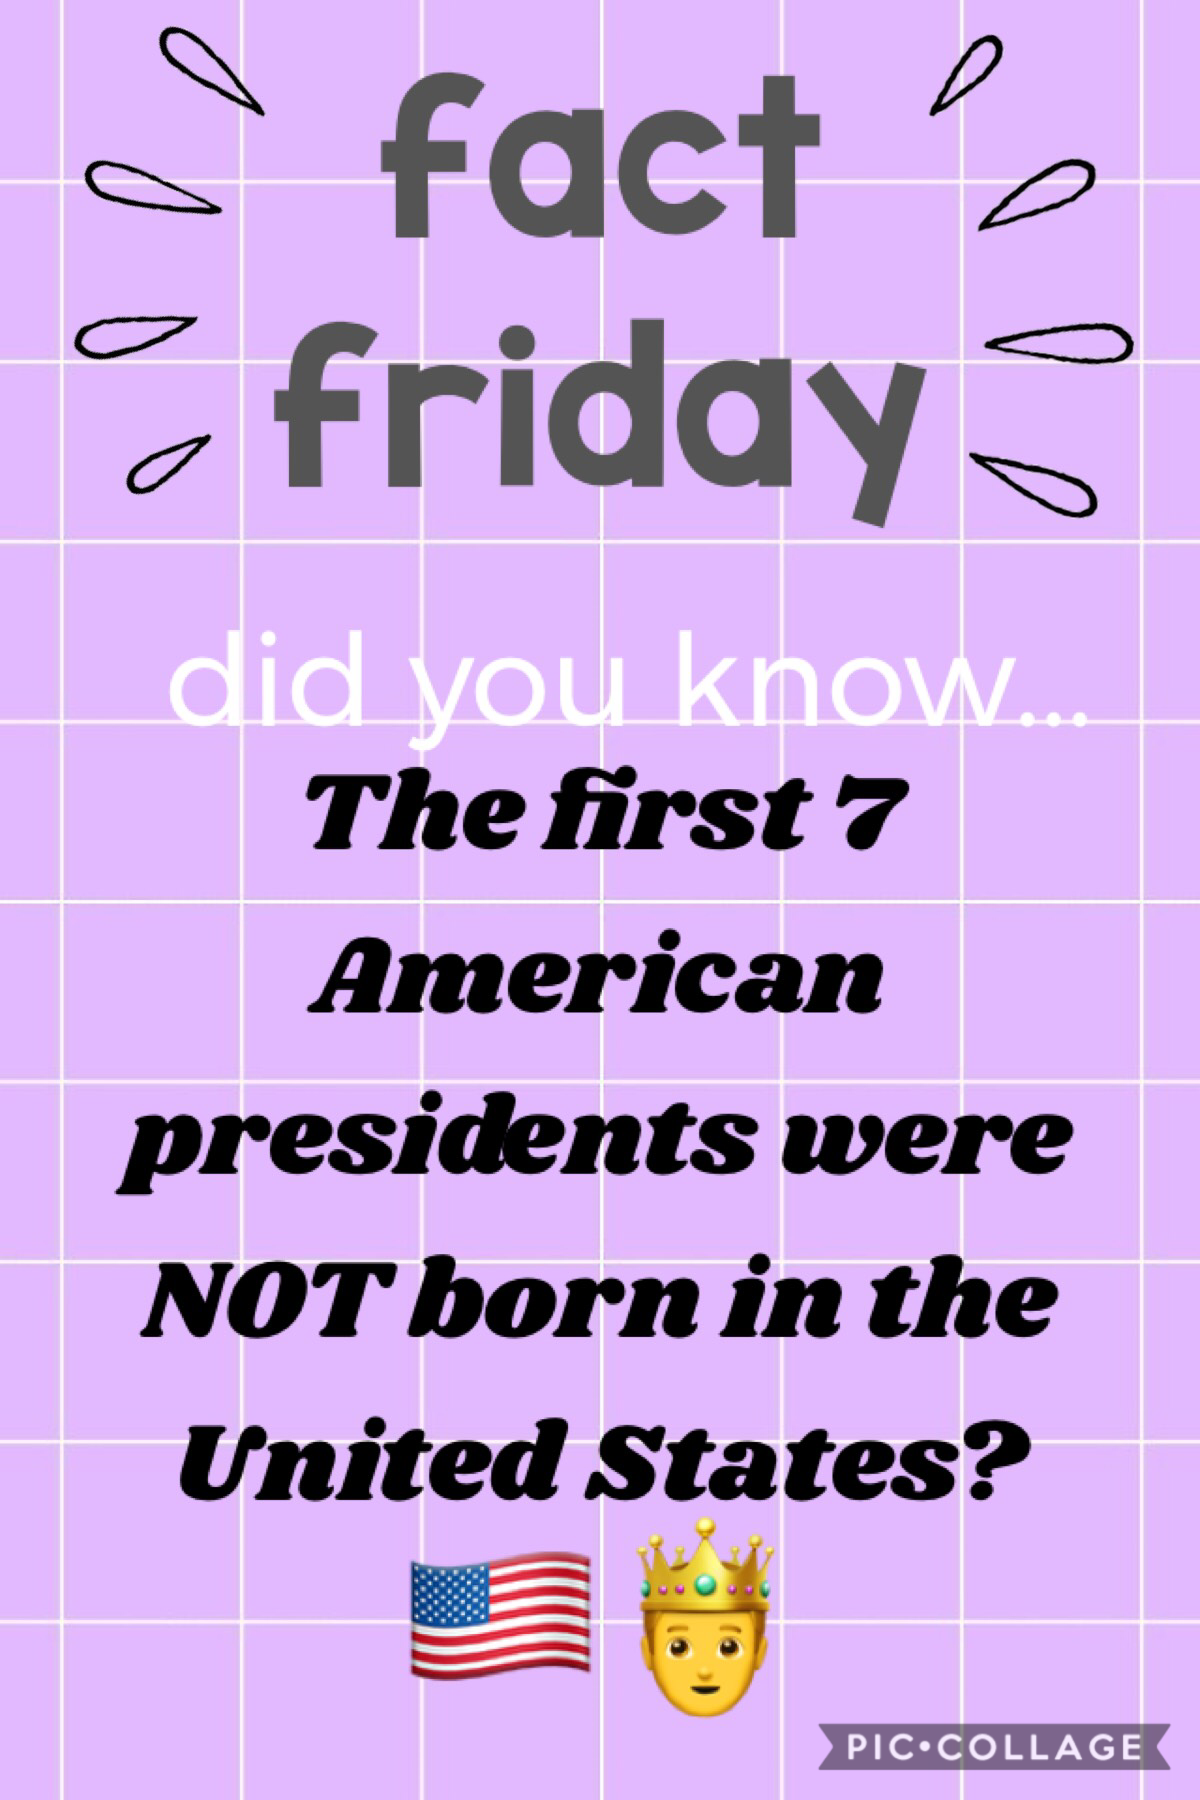 tap!
fact friday!
follow for more facts!